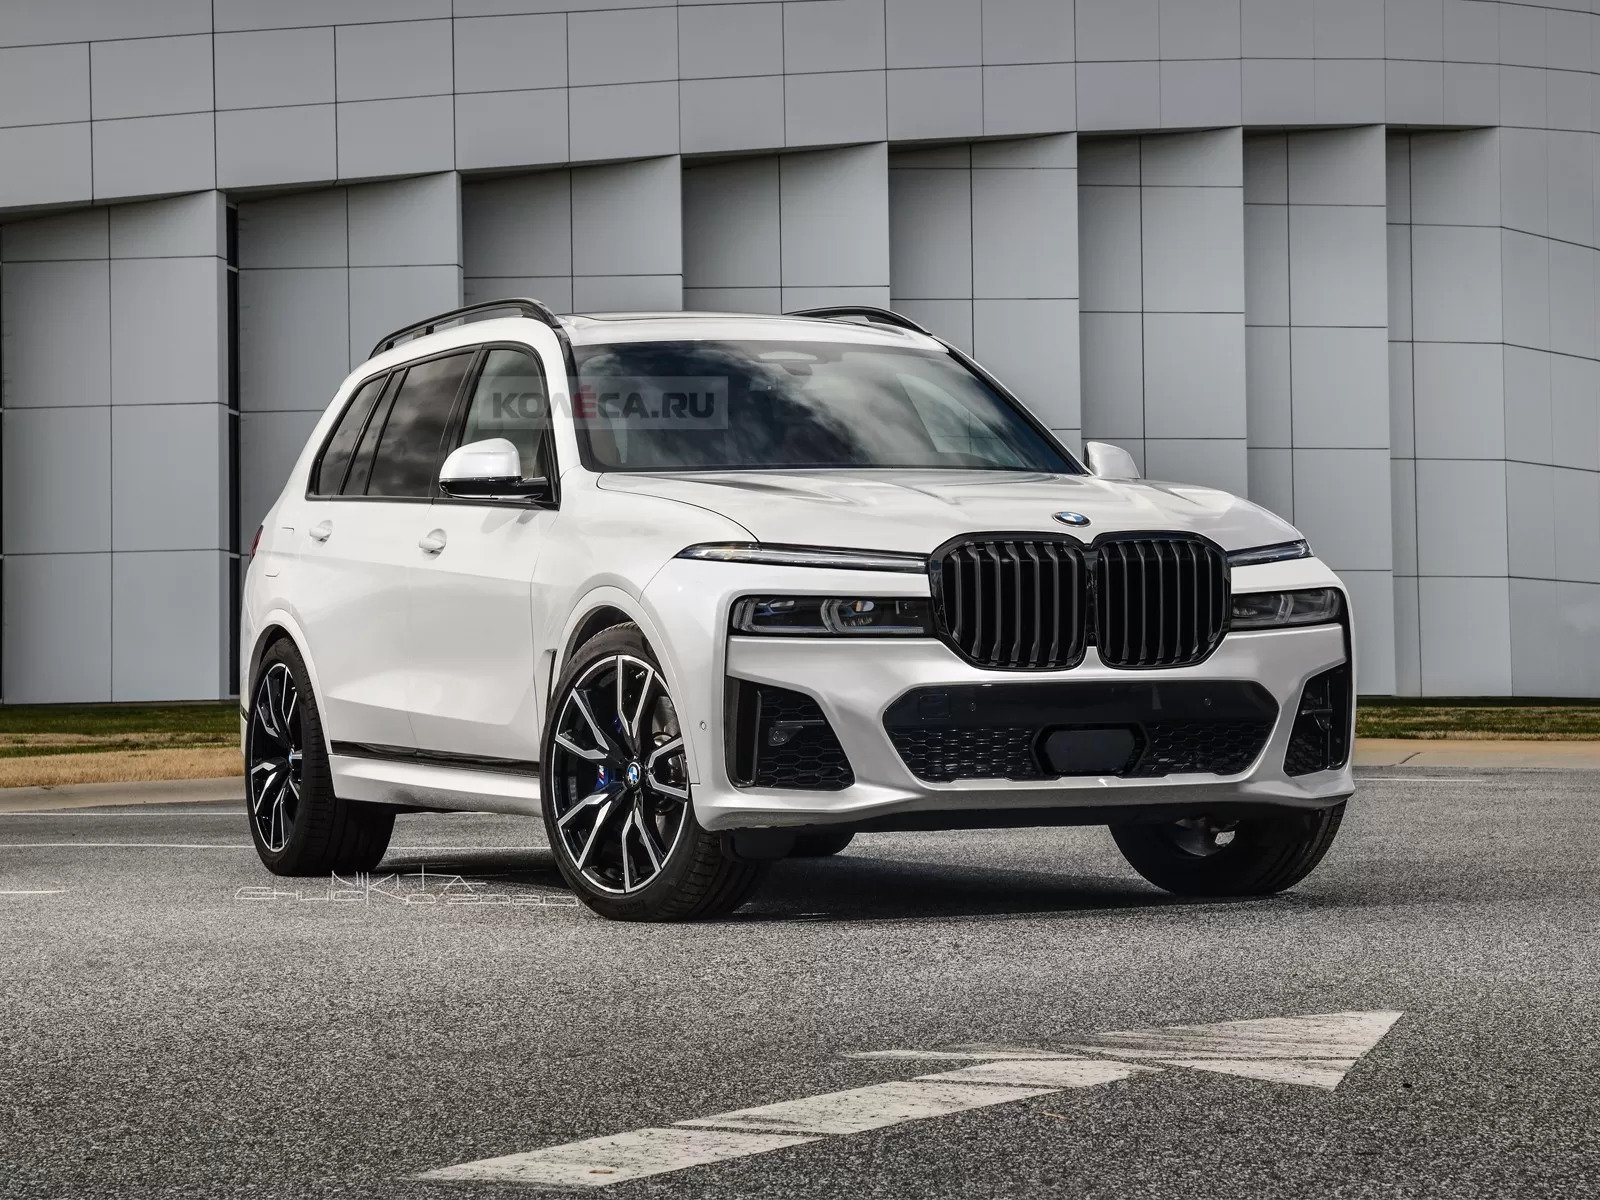 2022 BMW X7 Facelift Rendered With Twin Headlights, Huge Kidney Grille